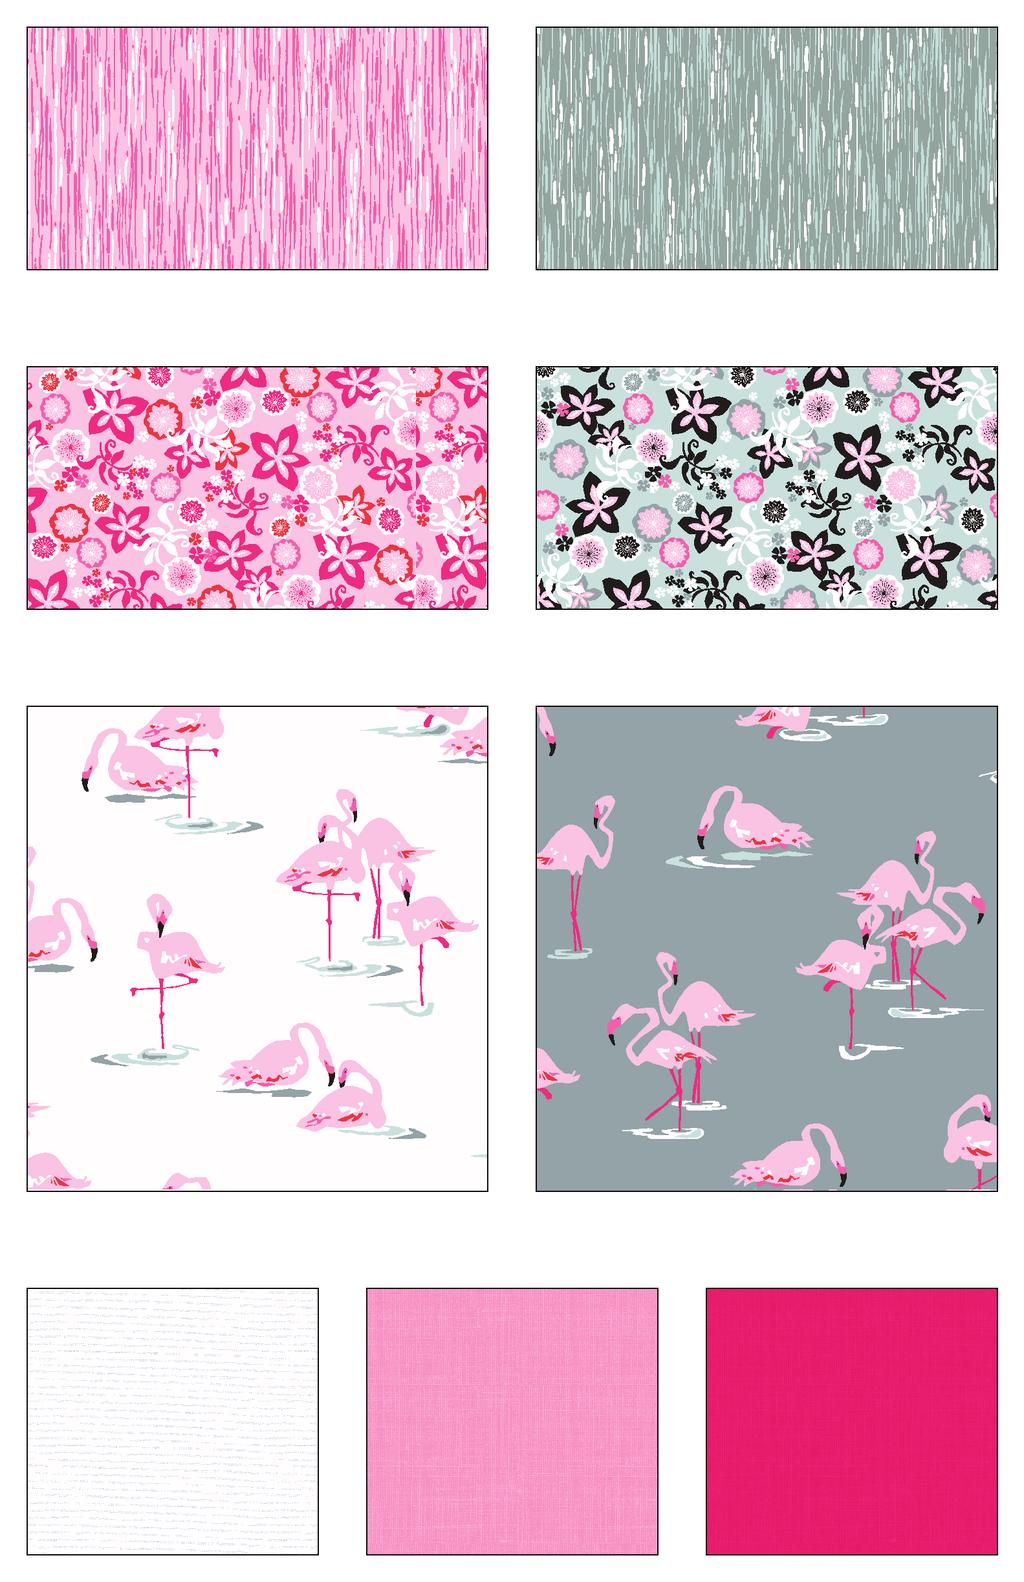 Flamingos FABRIS BY JANE IXON 7669-E 7/8 yd (includes binding) 7669-1/2 yd 7668-E 7/8 yd 7668-3 1/2 yds (includes backing) 7667-E 1/3 yd 7667-1 1/2 yds Fabrics shown are 25% of actual size.